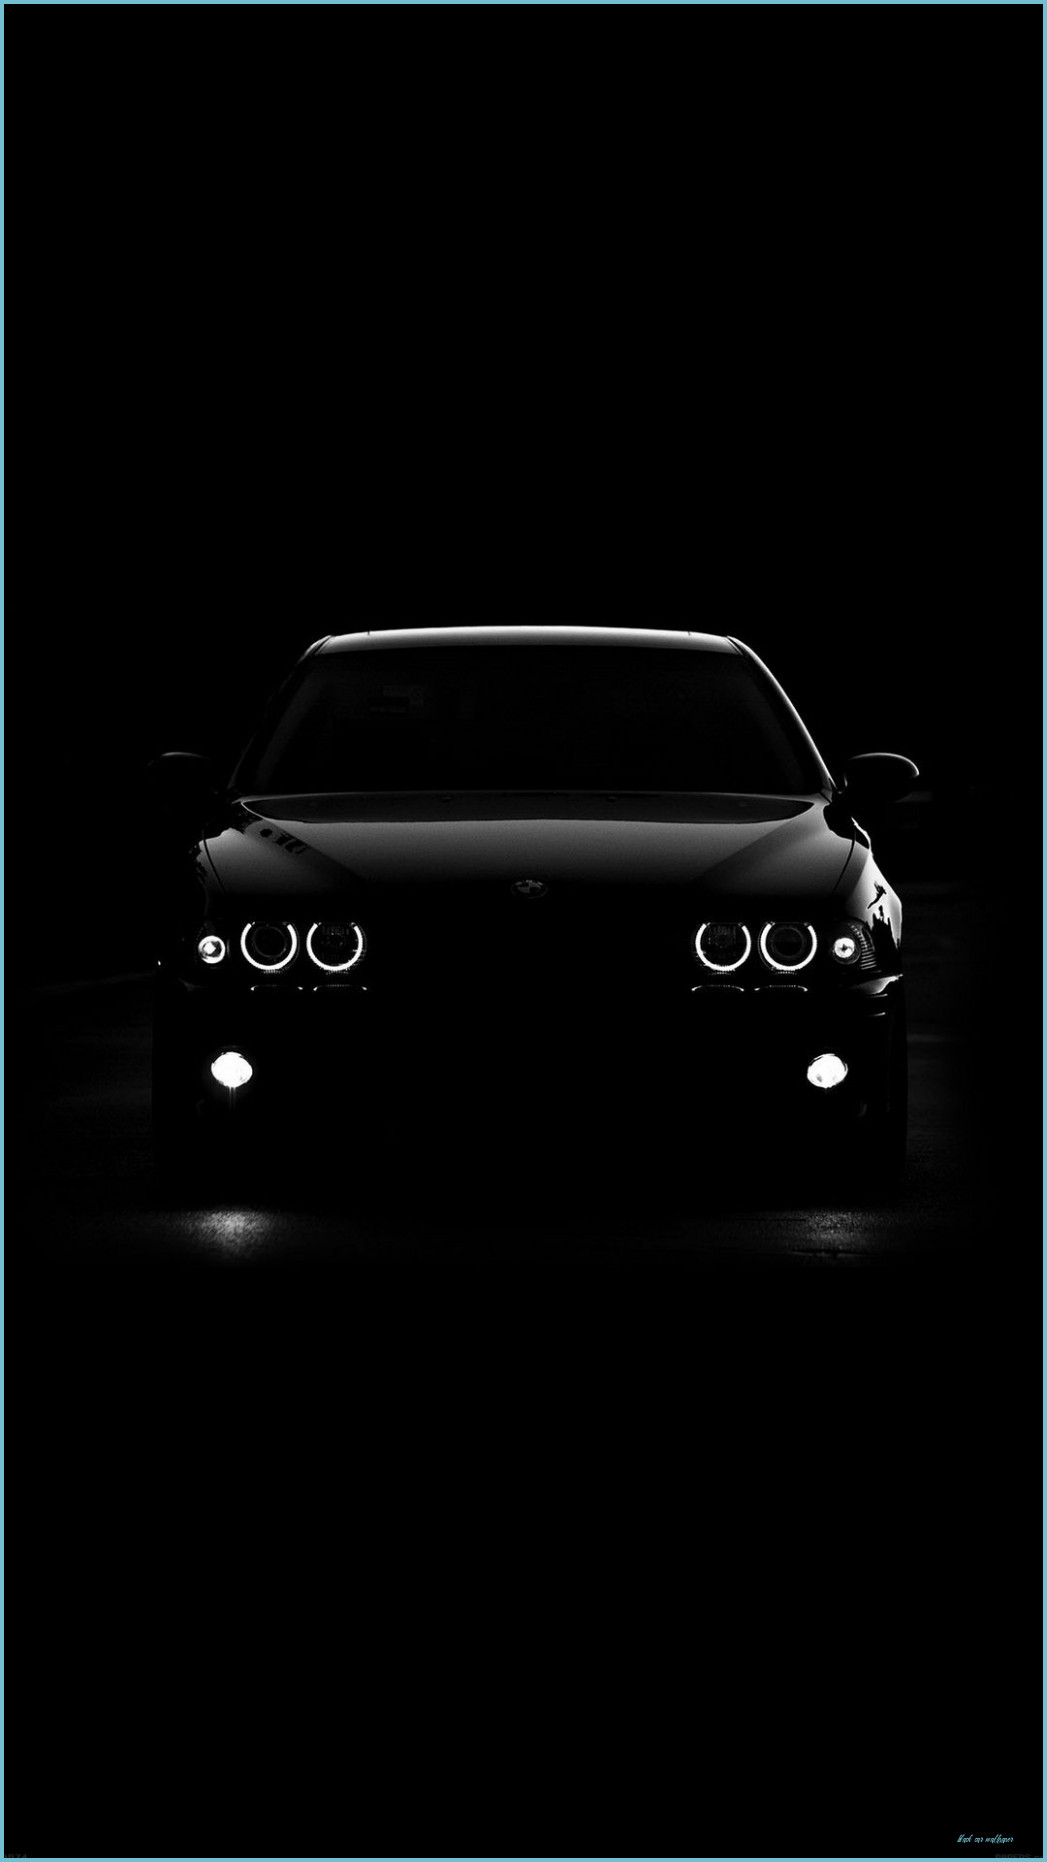 BMW Black Car Quality Htc One Wallpaper And Abstract Car Wallpaper